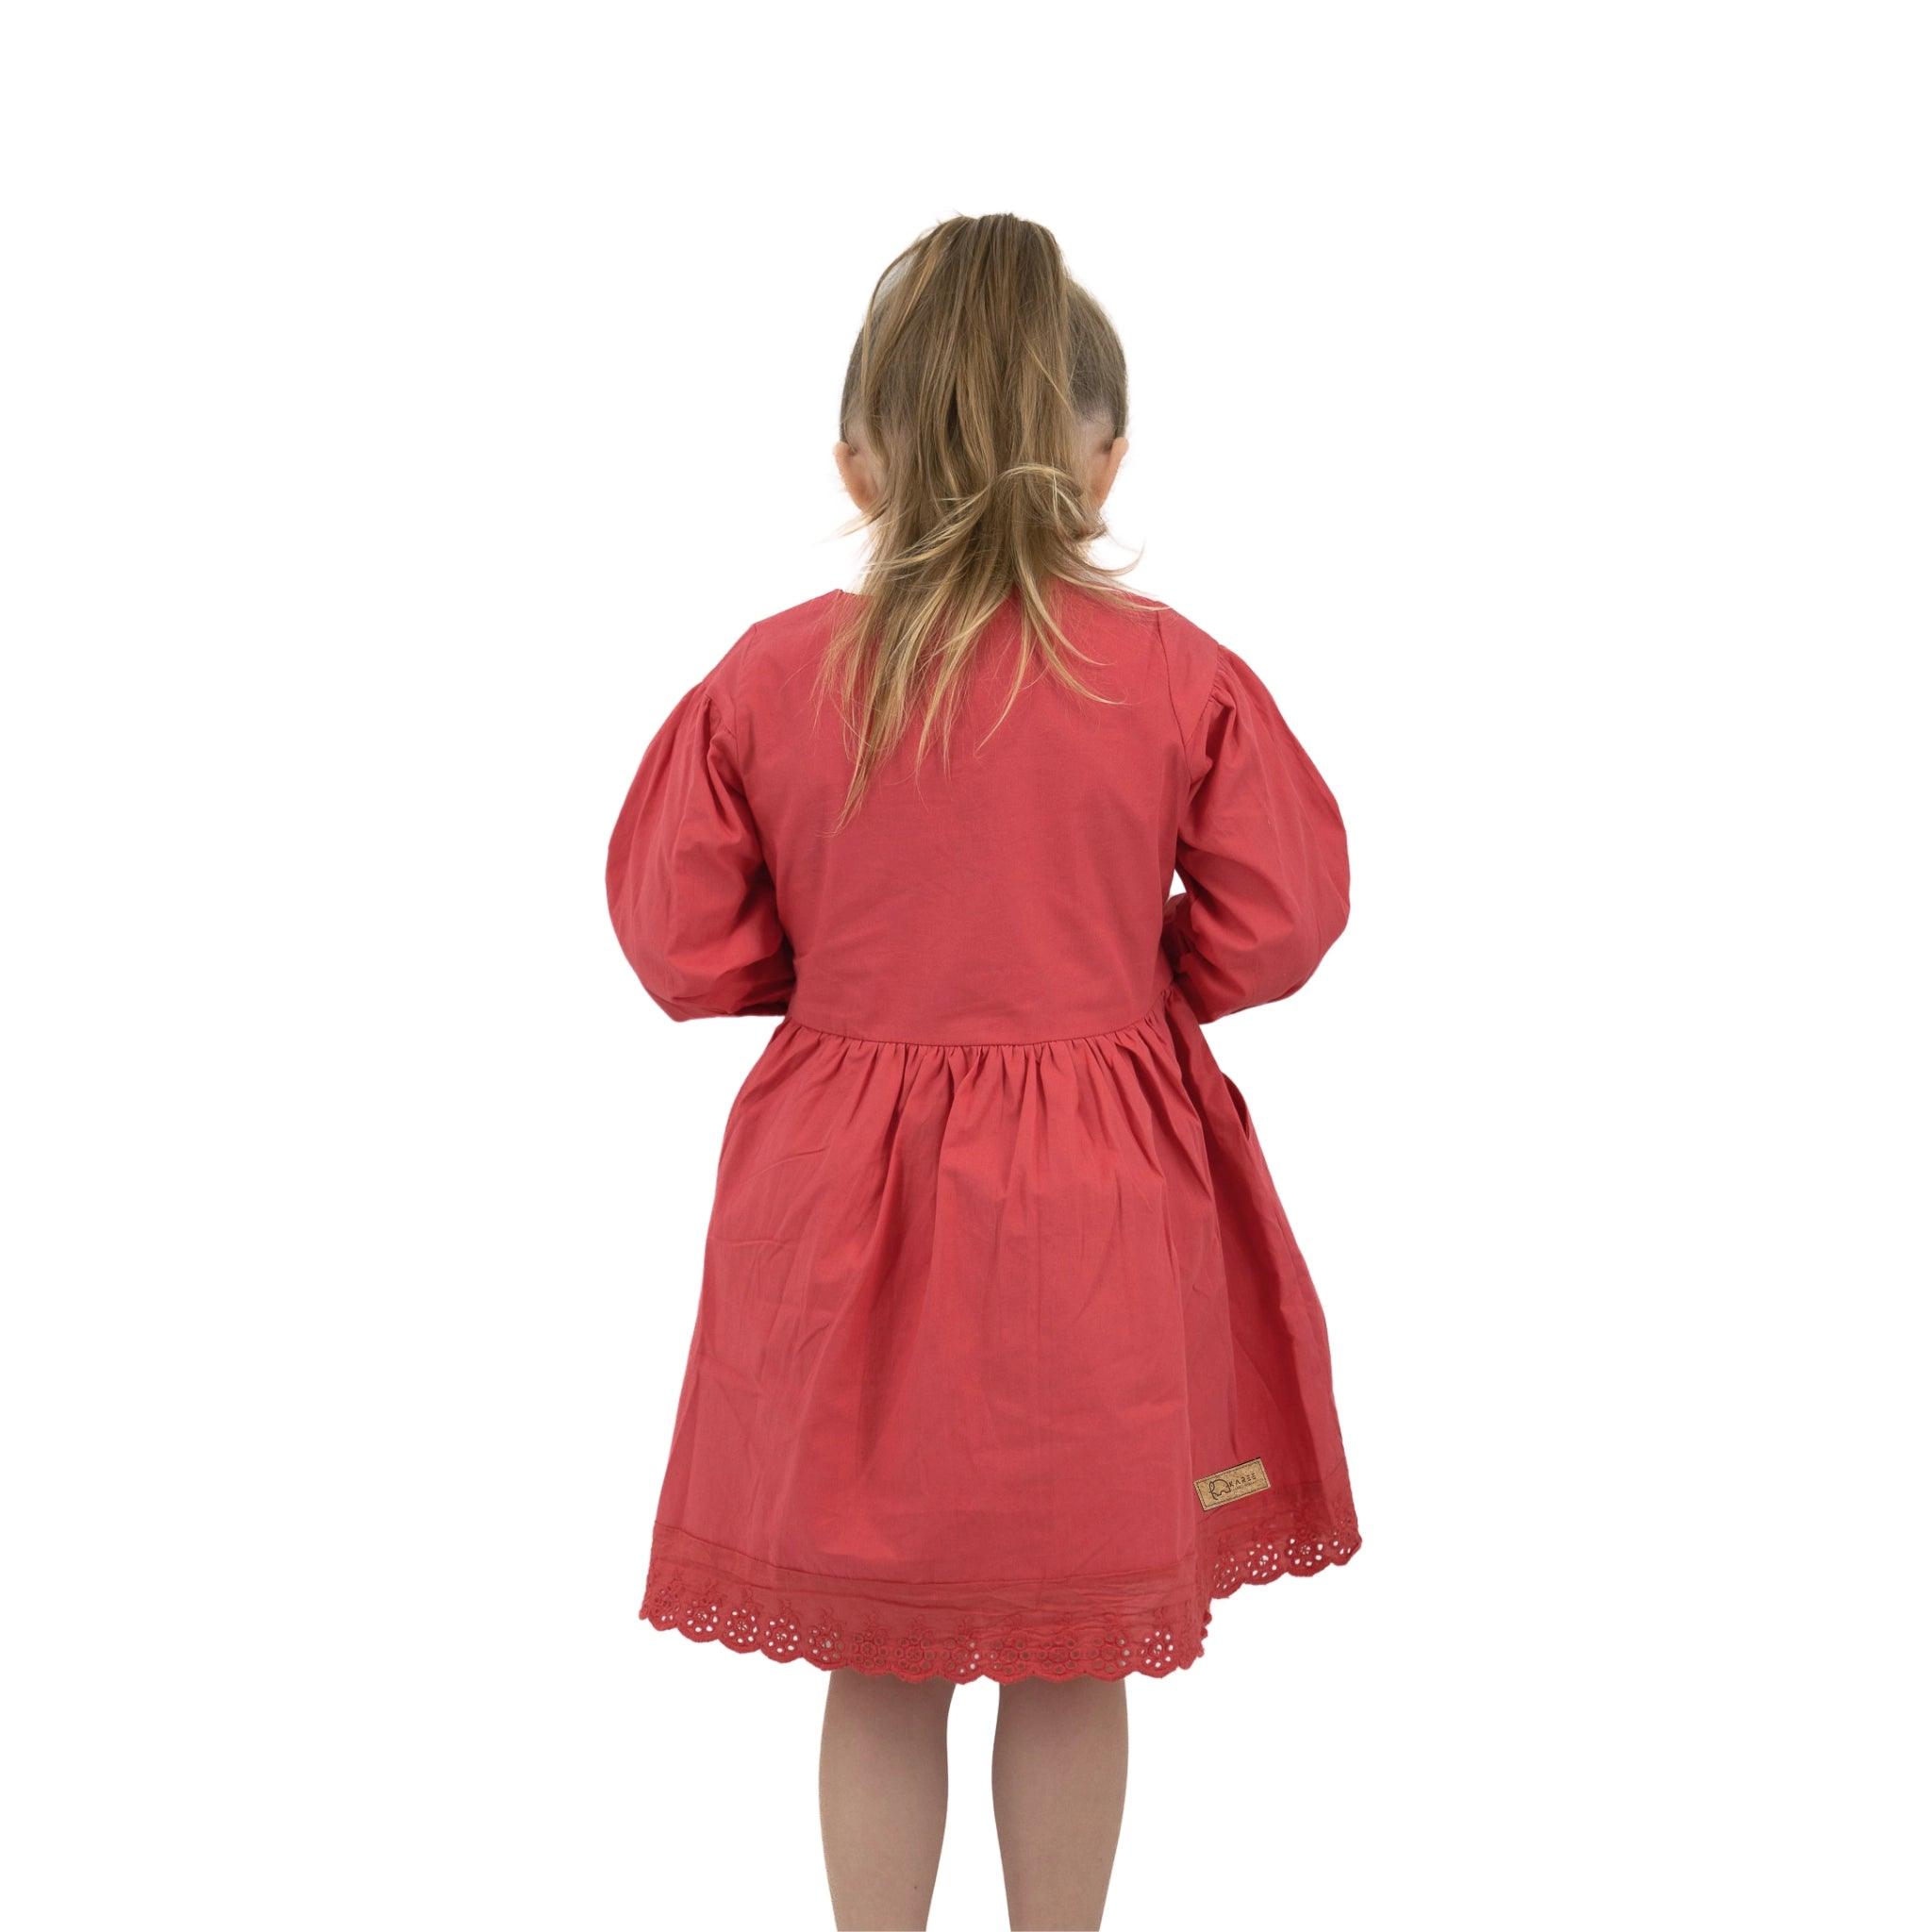 Young girl in a Karee red long puff sleeve cotton dress with lace trim, viewed from the back, standing against a white background.